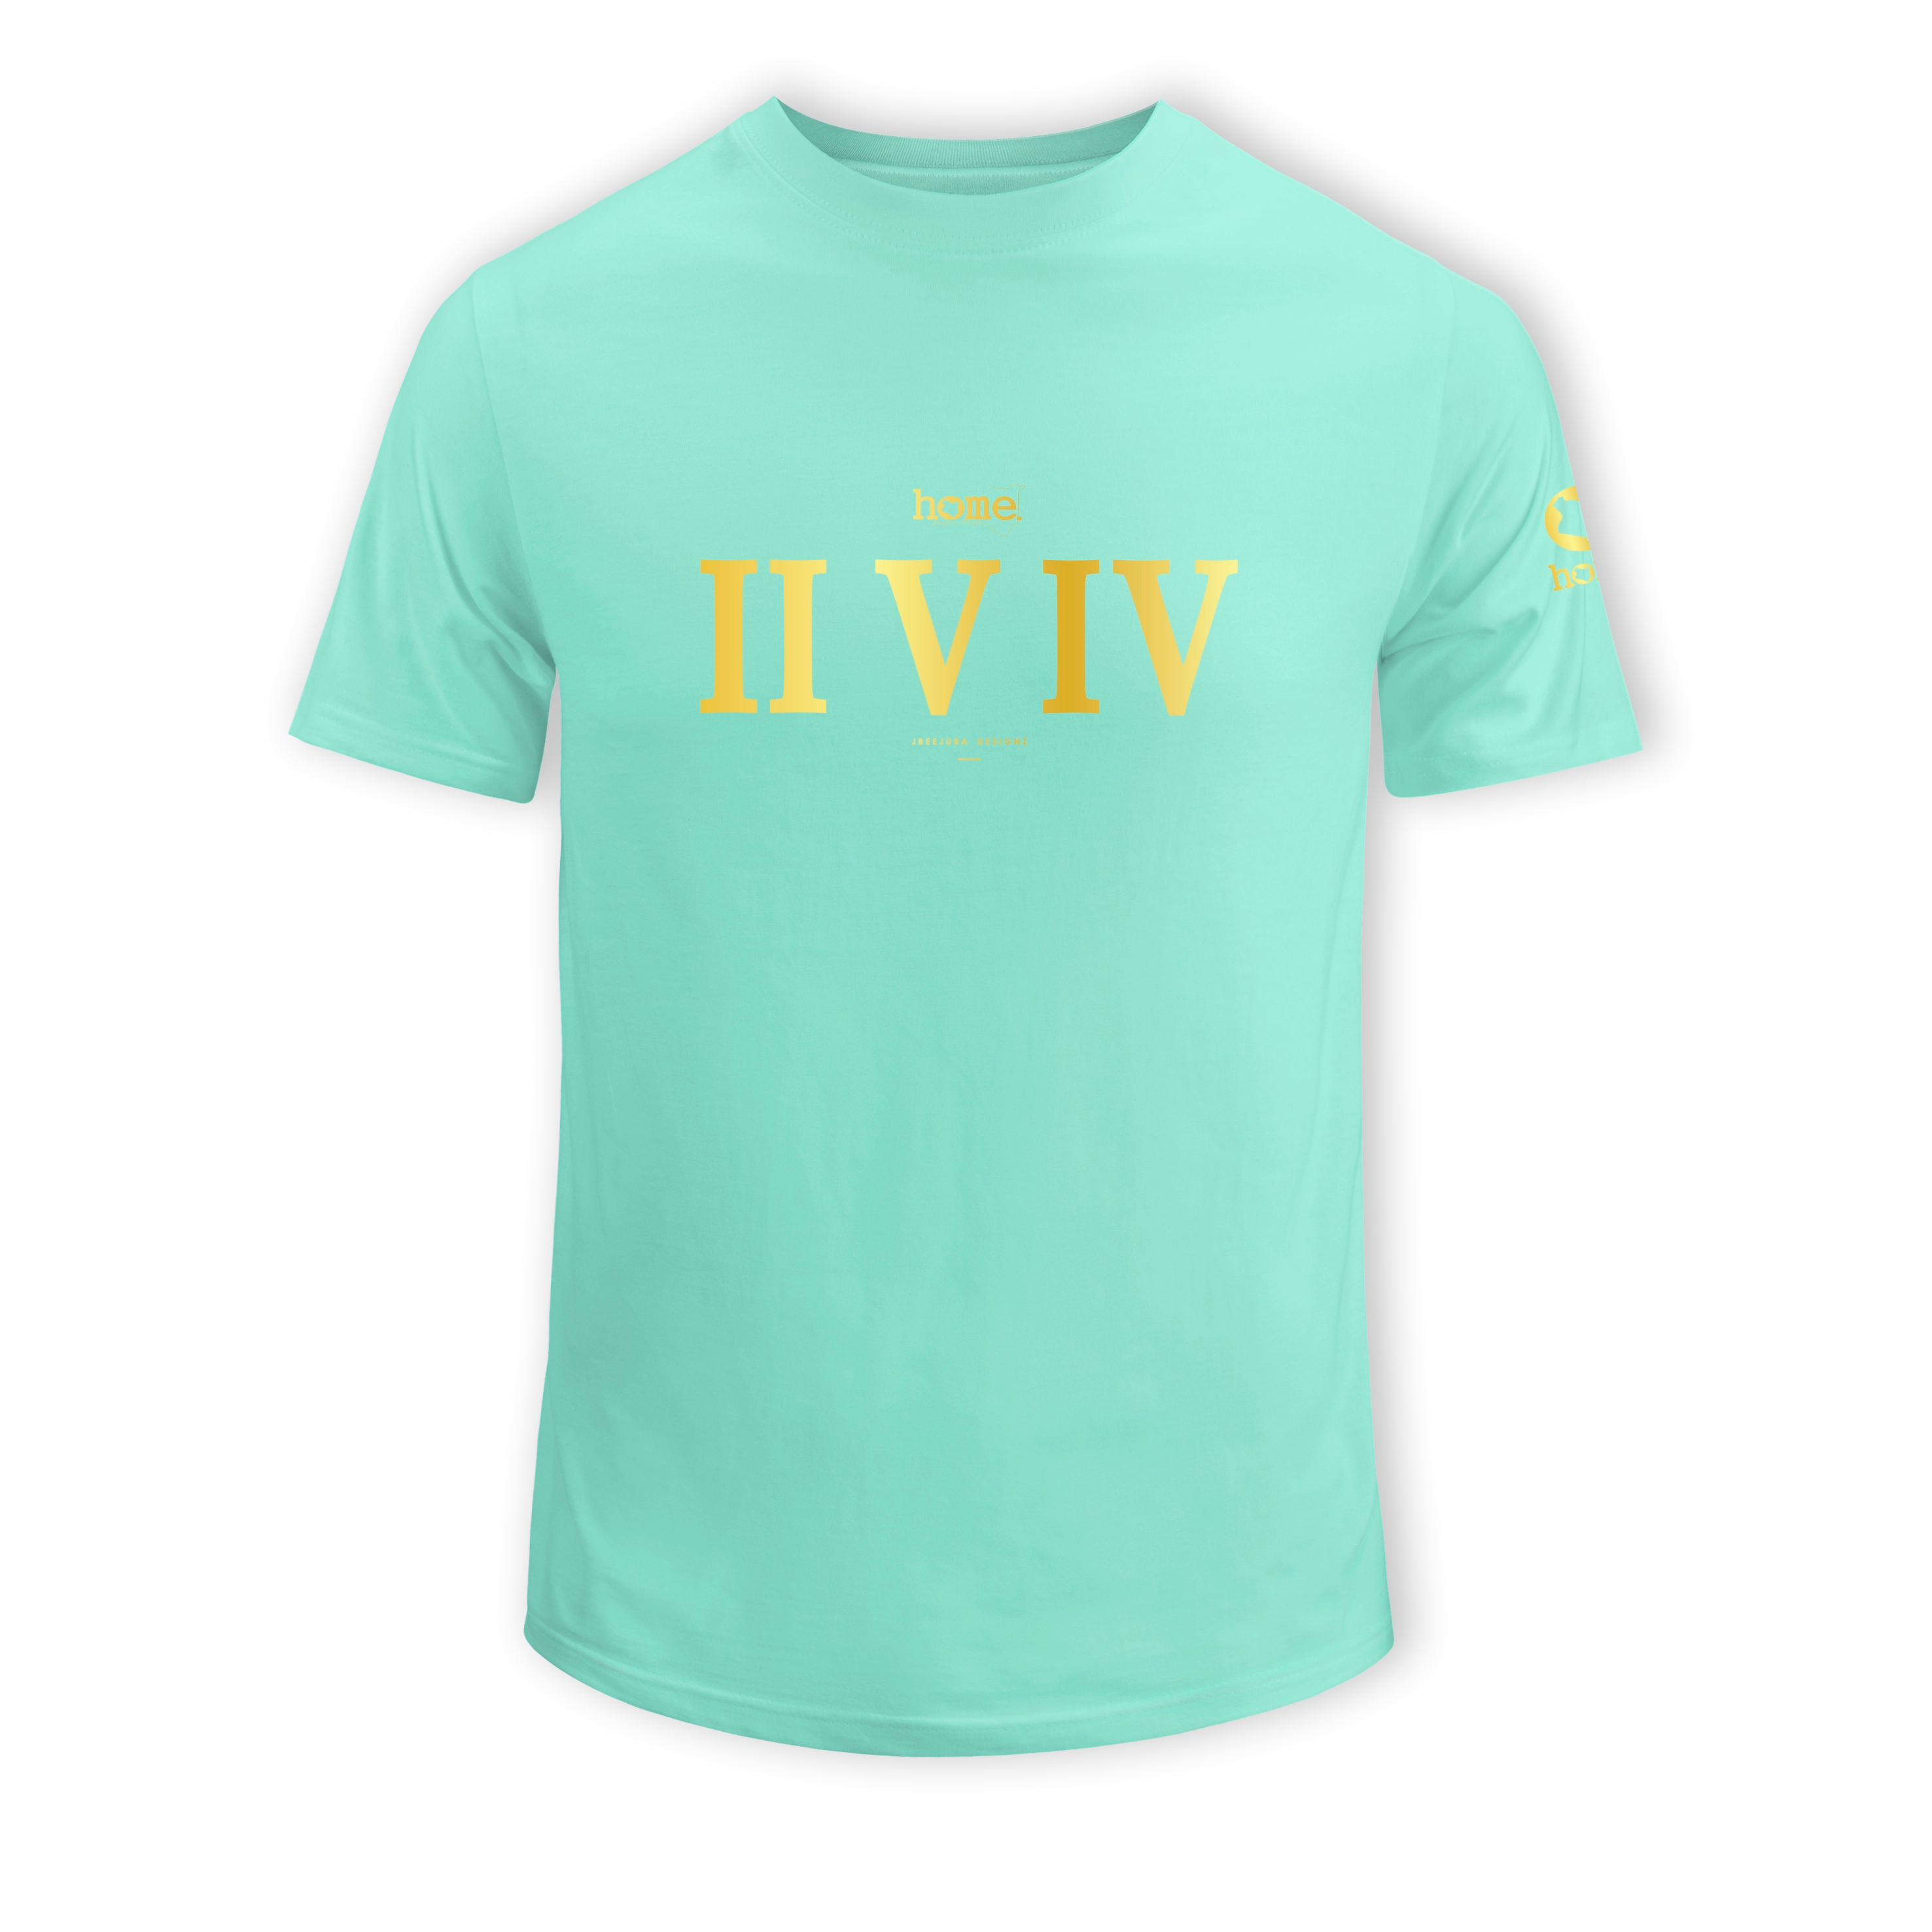 home_254 SHORT-SLEEVED TURQUOISE GREEN T-SHIRT WITH A GOLD ROMAN NUMERALS PRINT – COTTON PLUS FABRIC